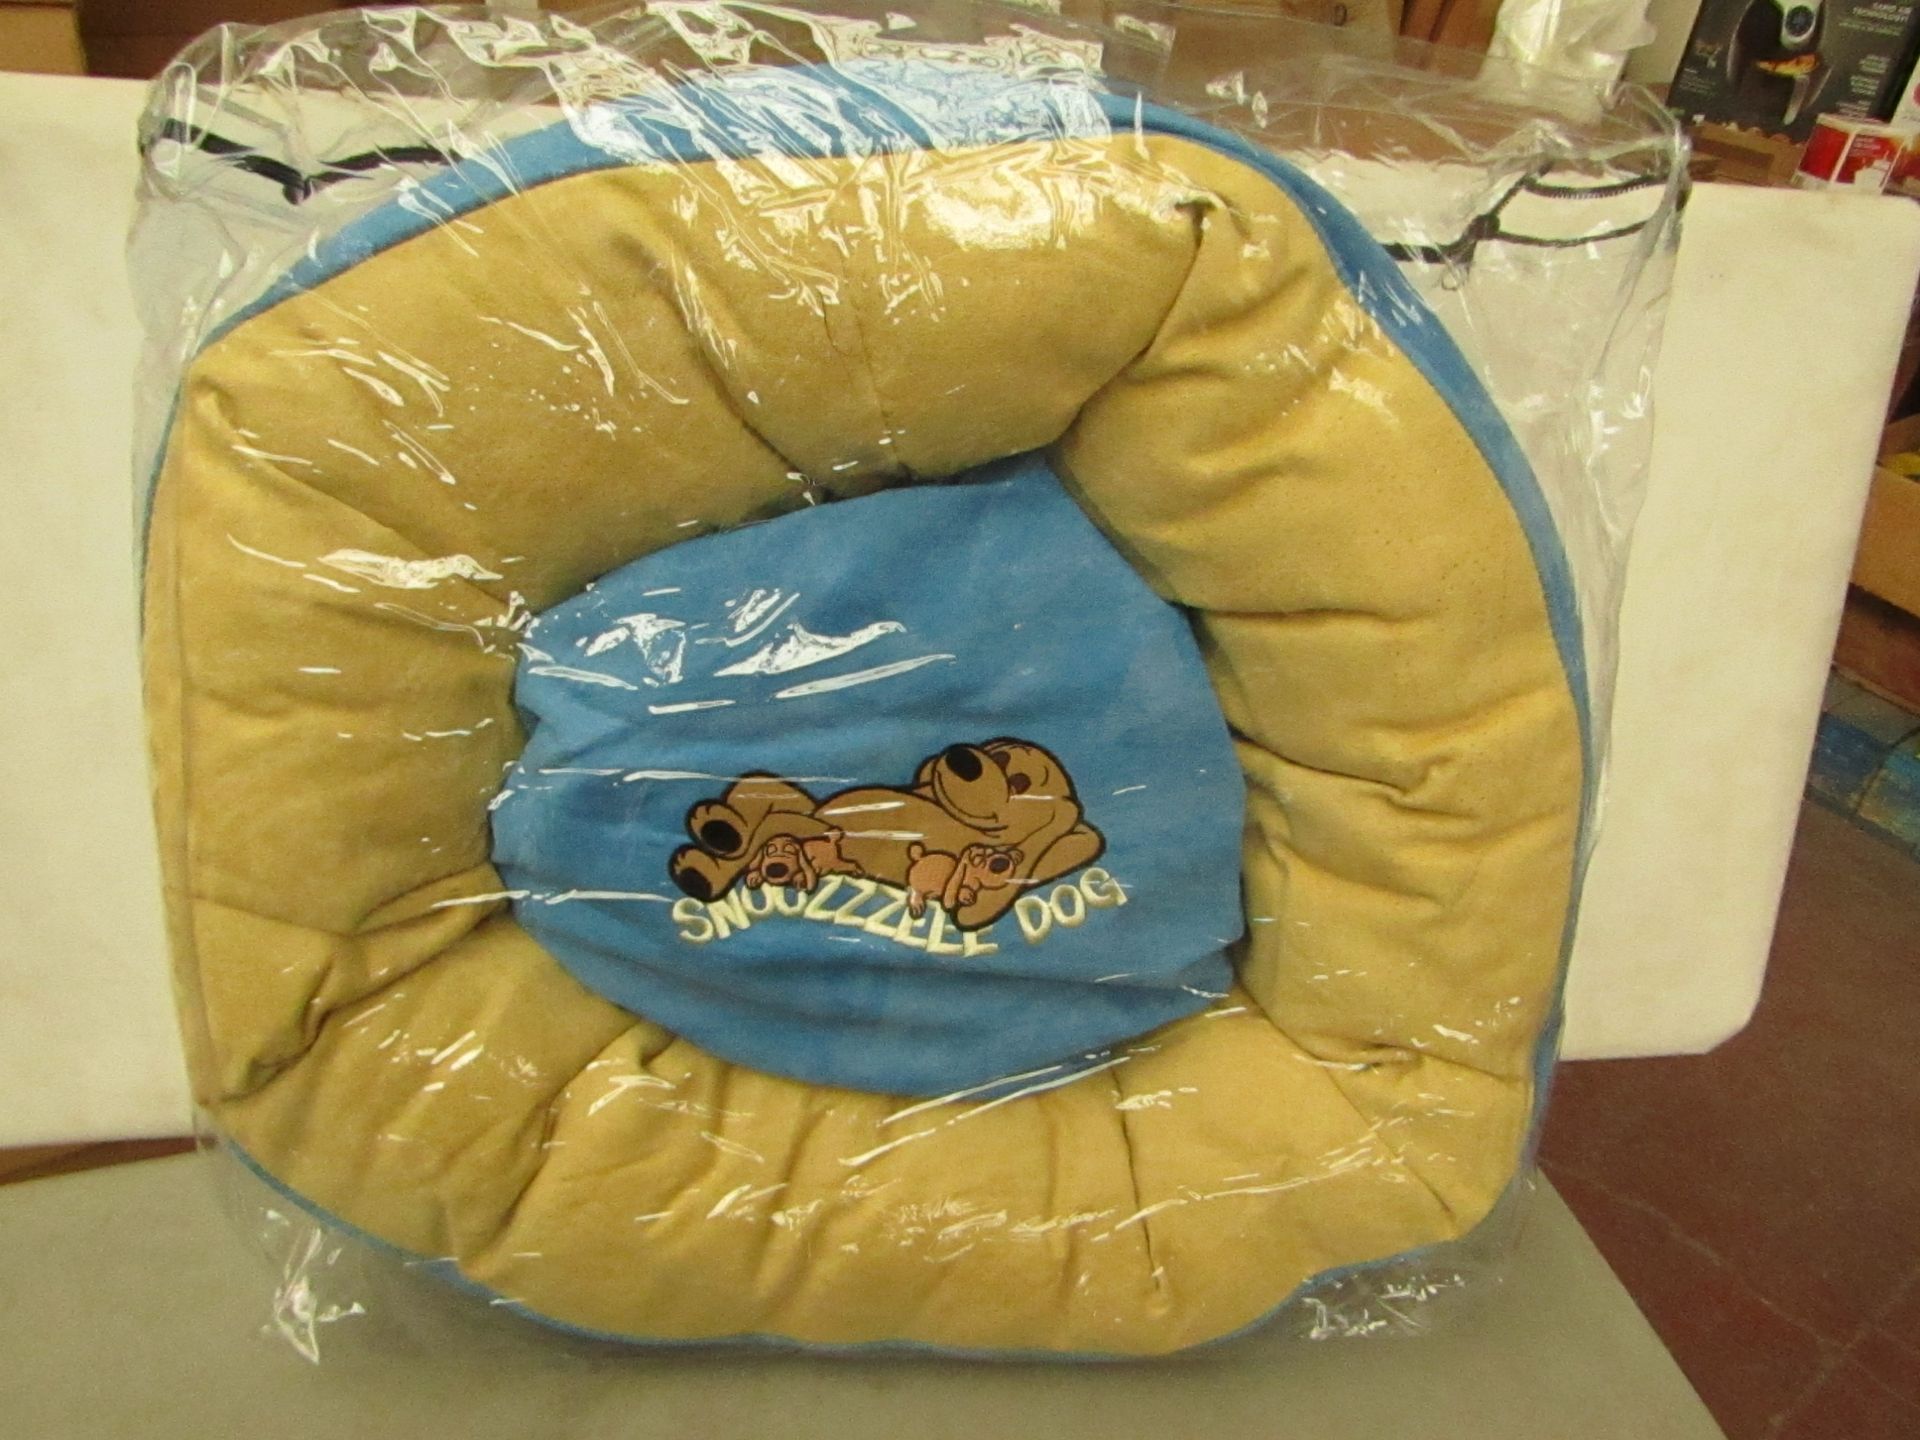 1x Snoozzzeee Dog - Sky Blue Donut Dog Bed (Size 19") - All New & Packaged.